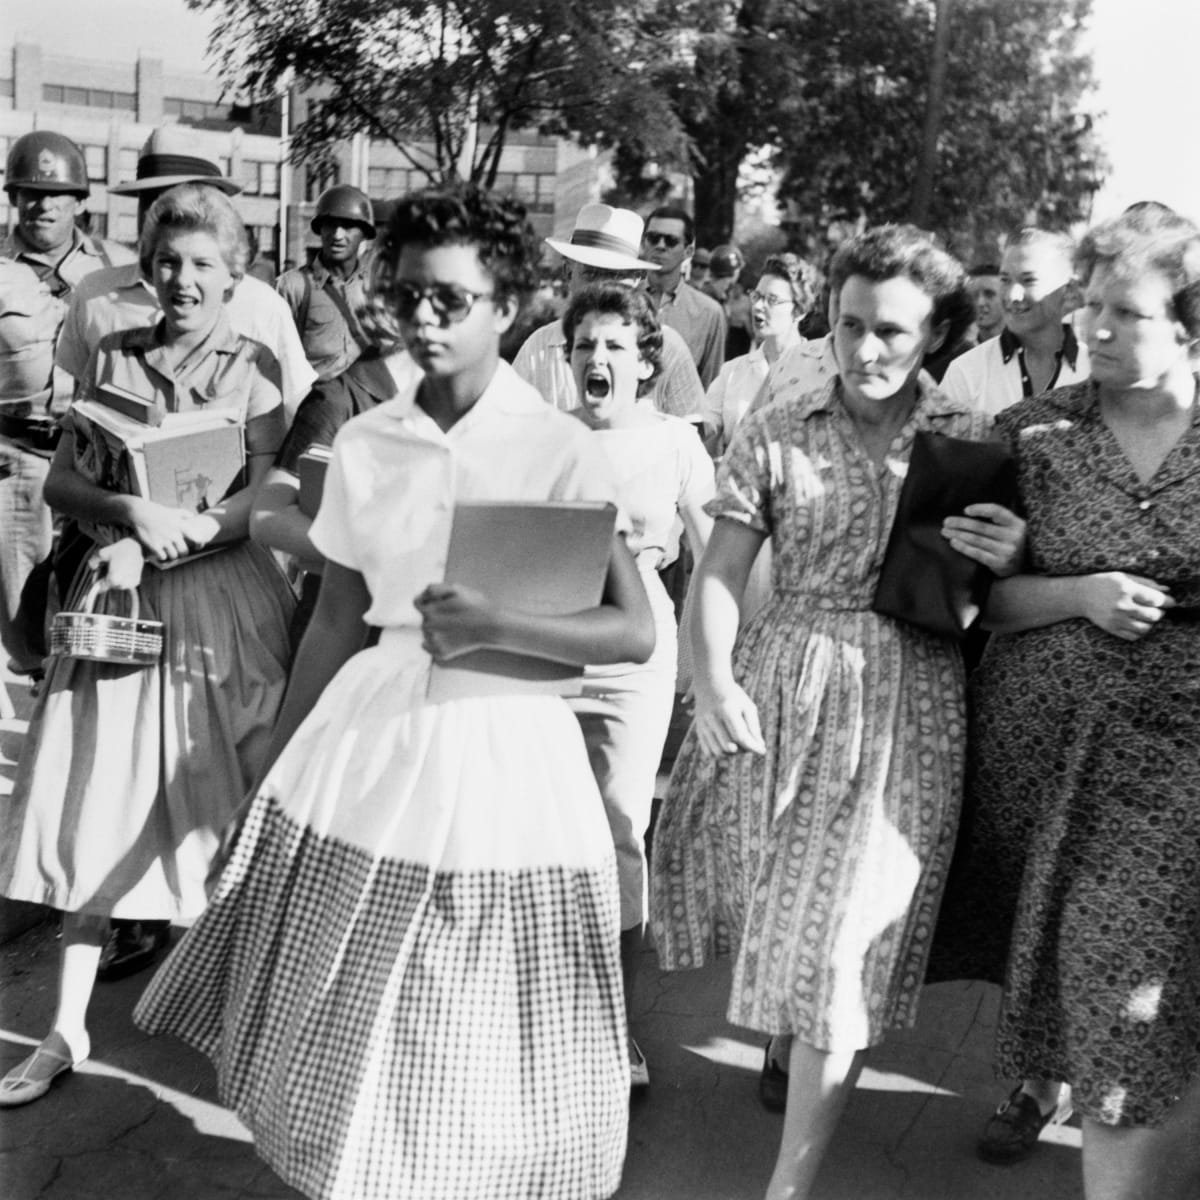 The first black student to enroll in a white high school, following desegregation.